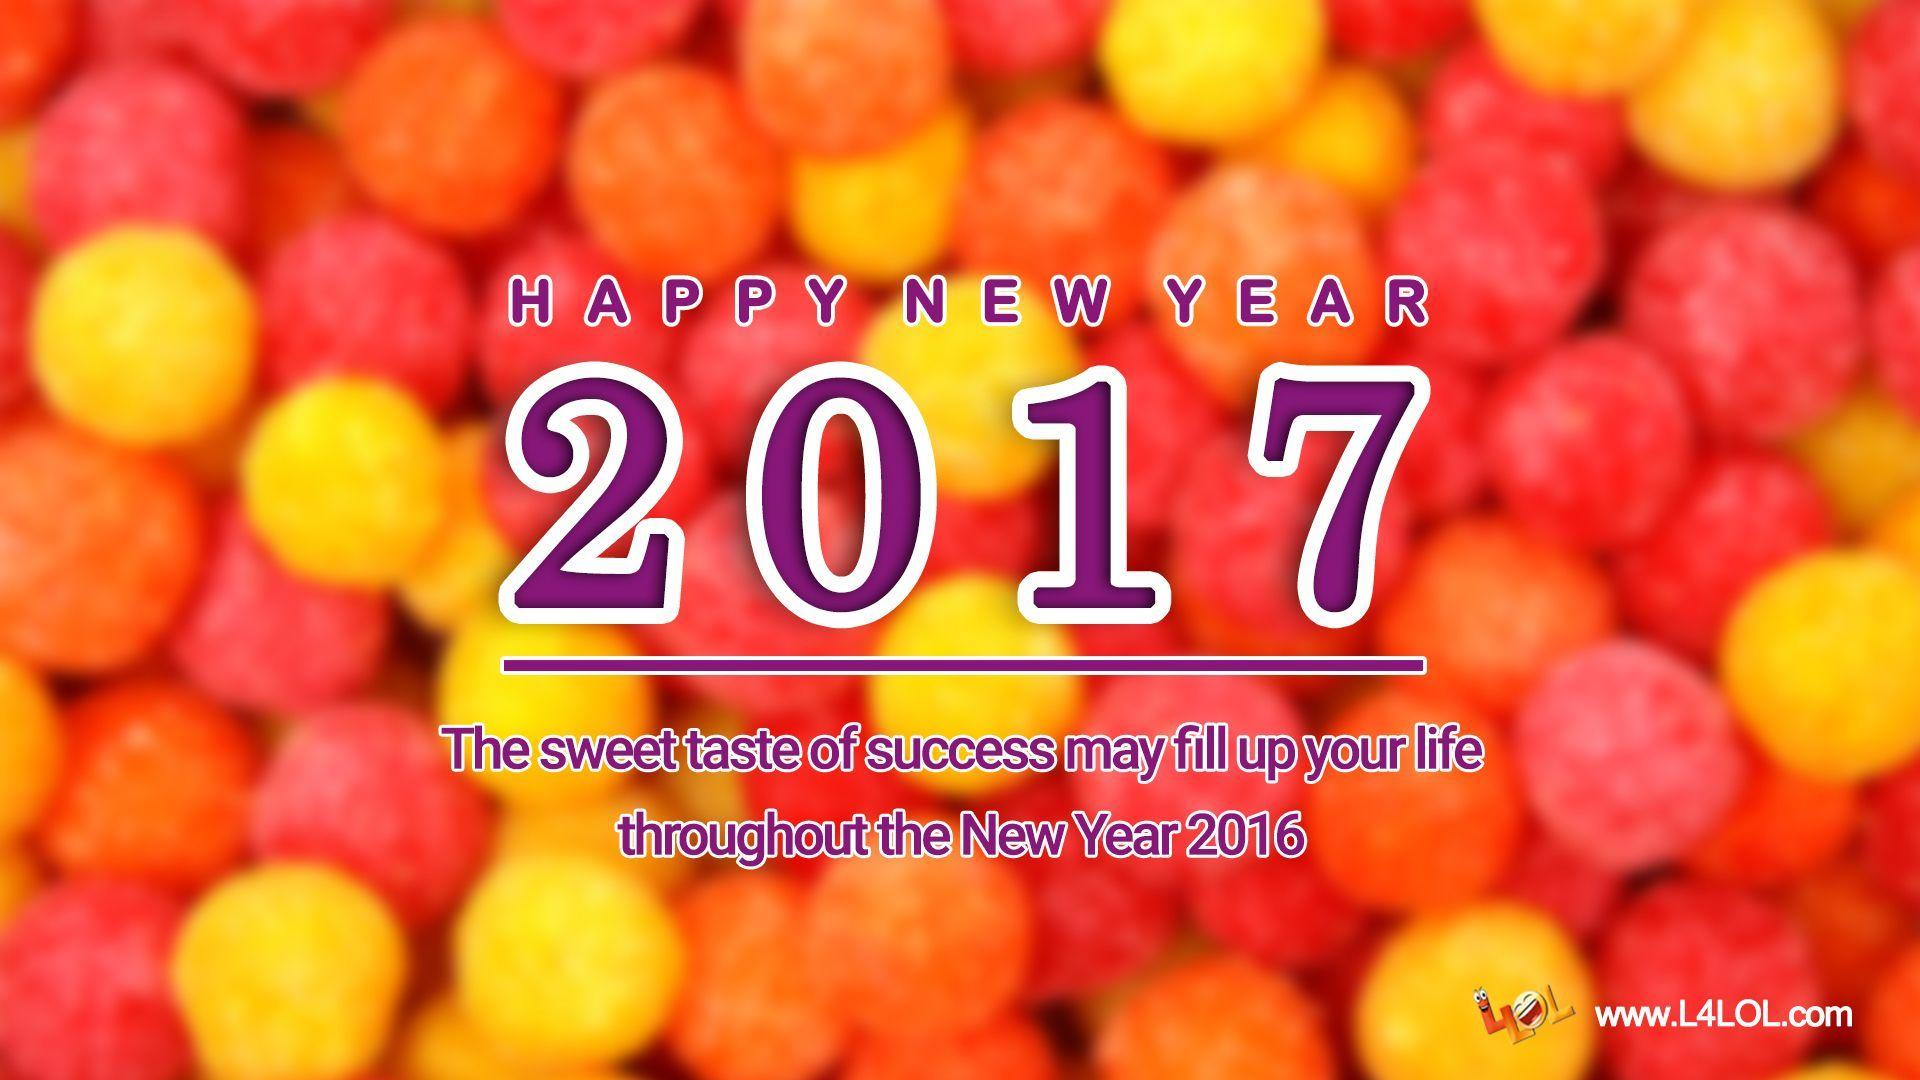 Happy New Year Wallpaper and Image 2017 Free Downlaod